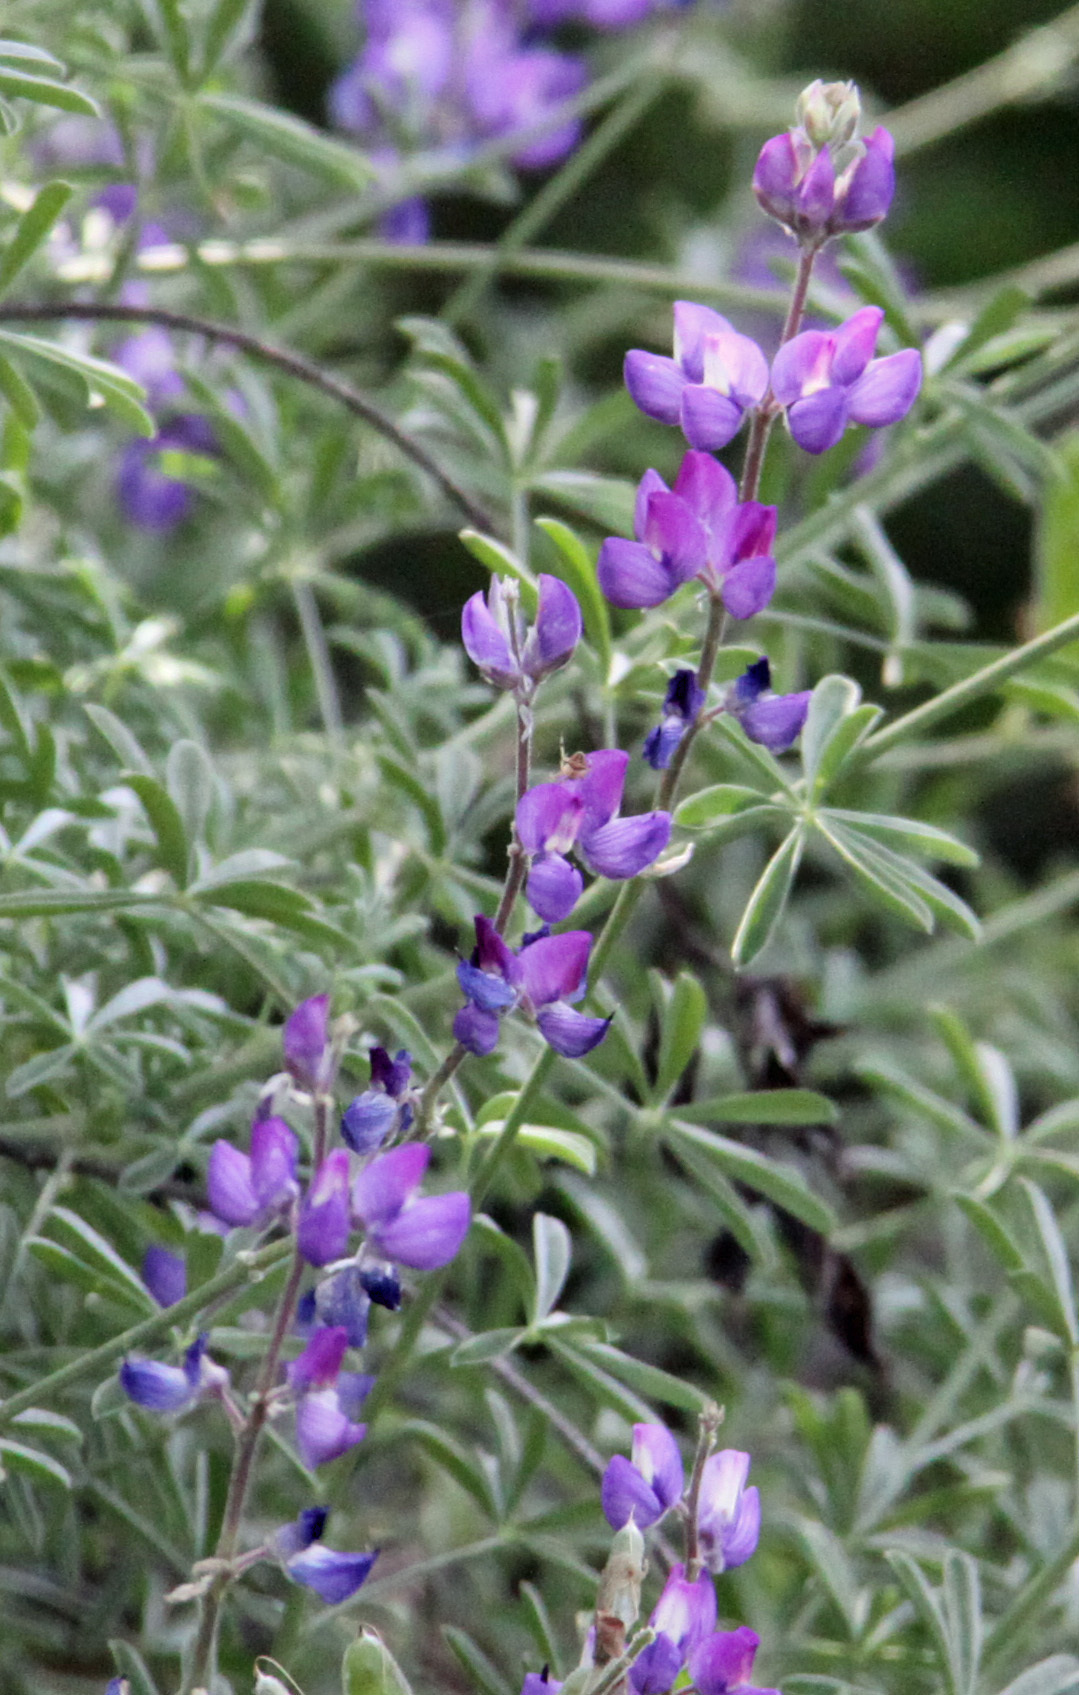 Image of silver lupine